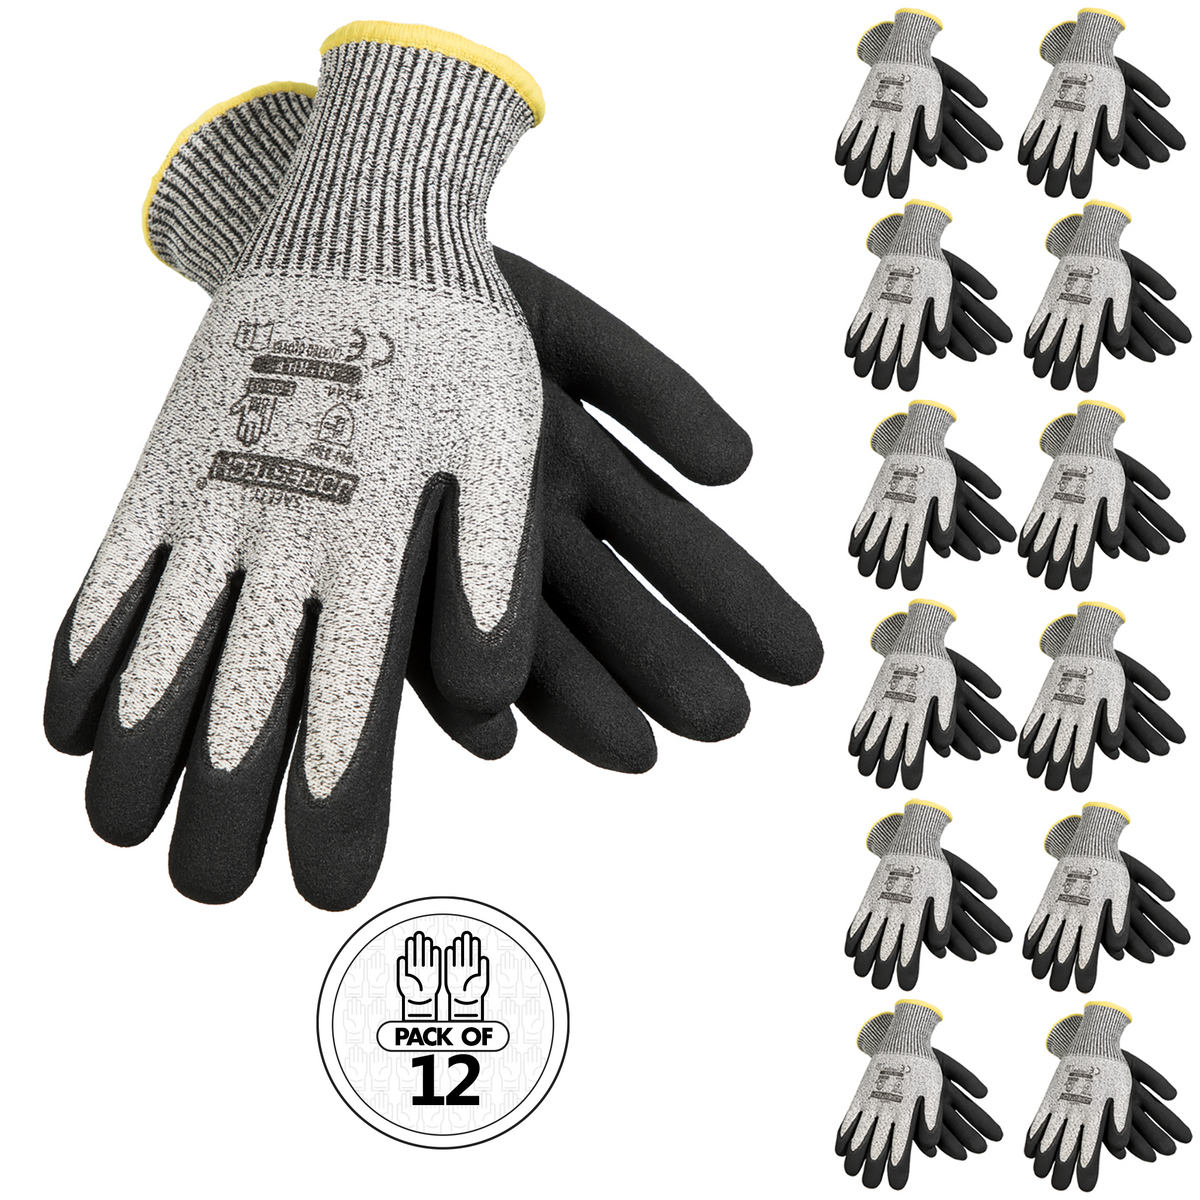 http://technopackcorp.com/cdn/shop/products/CUT-RESISTANT-SAFETY-WORK-GLOVES-WITH-NITRILE-DIPPED-PALMS-PACK-OF-12-S-GD-03-JORESTECH-H_17_1200x1200.png?v=1671639819